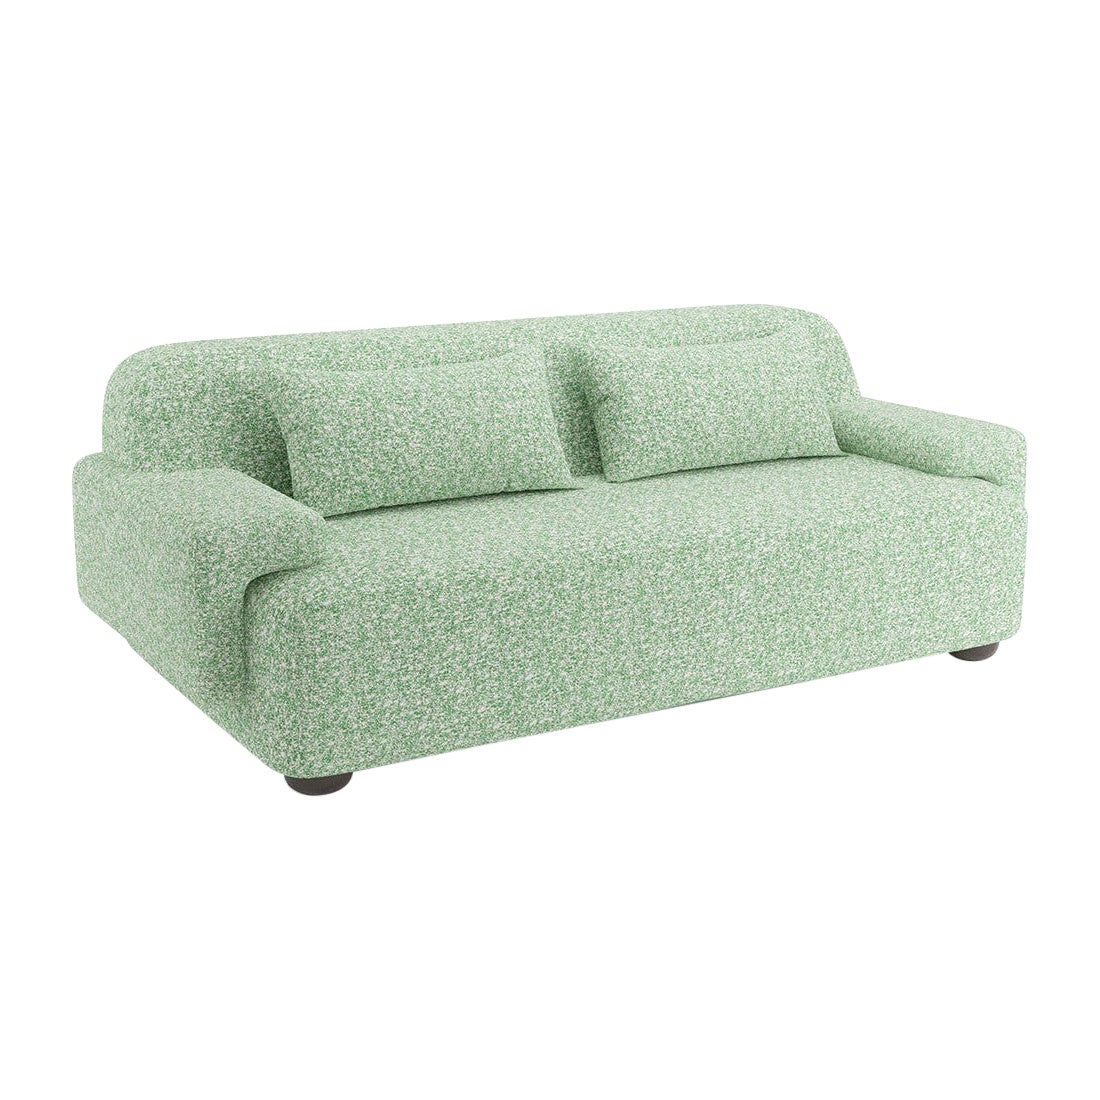 Popus Editions Lena 3 Seater Sofa in Grass Zanzi Linen and Wool Blend Fabric For Sale